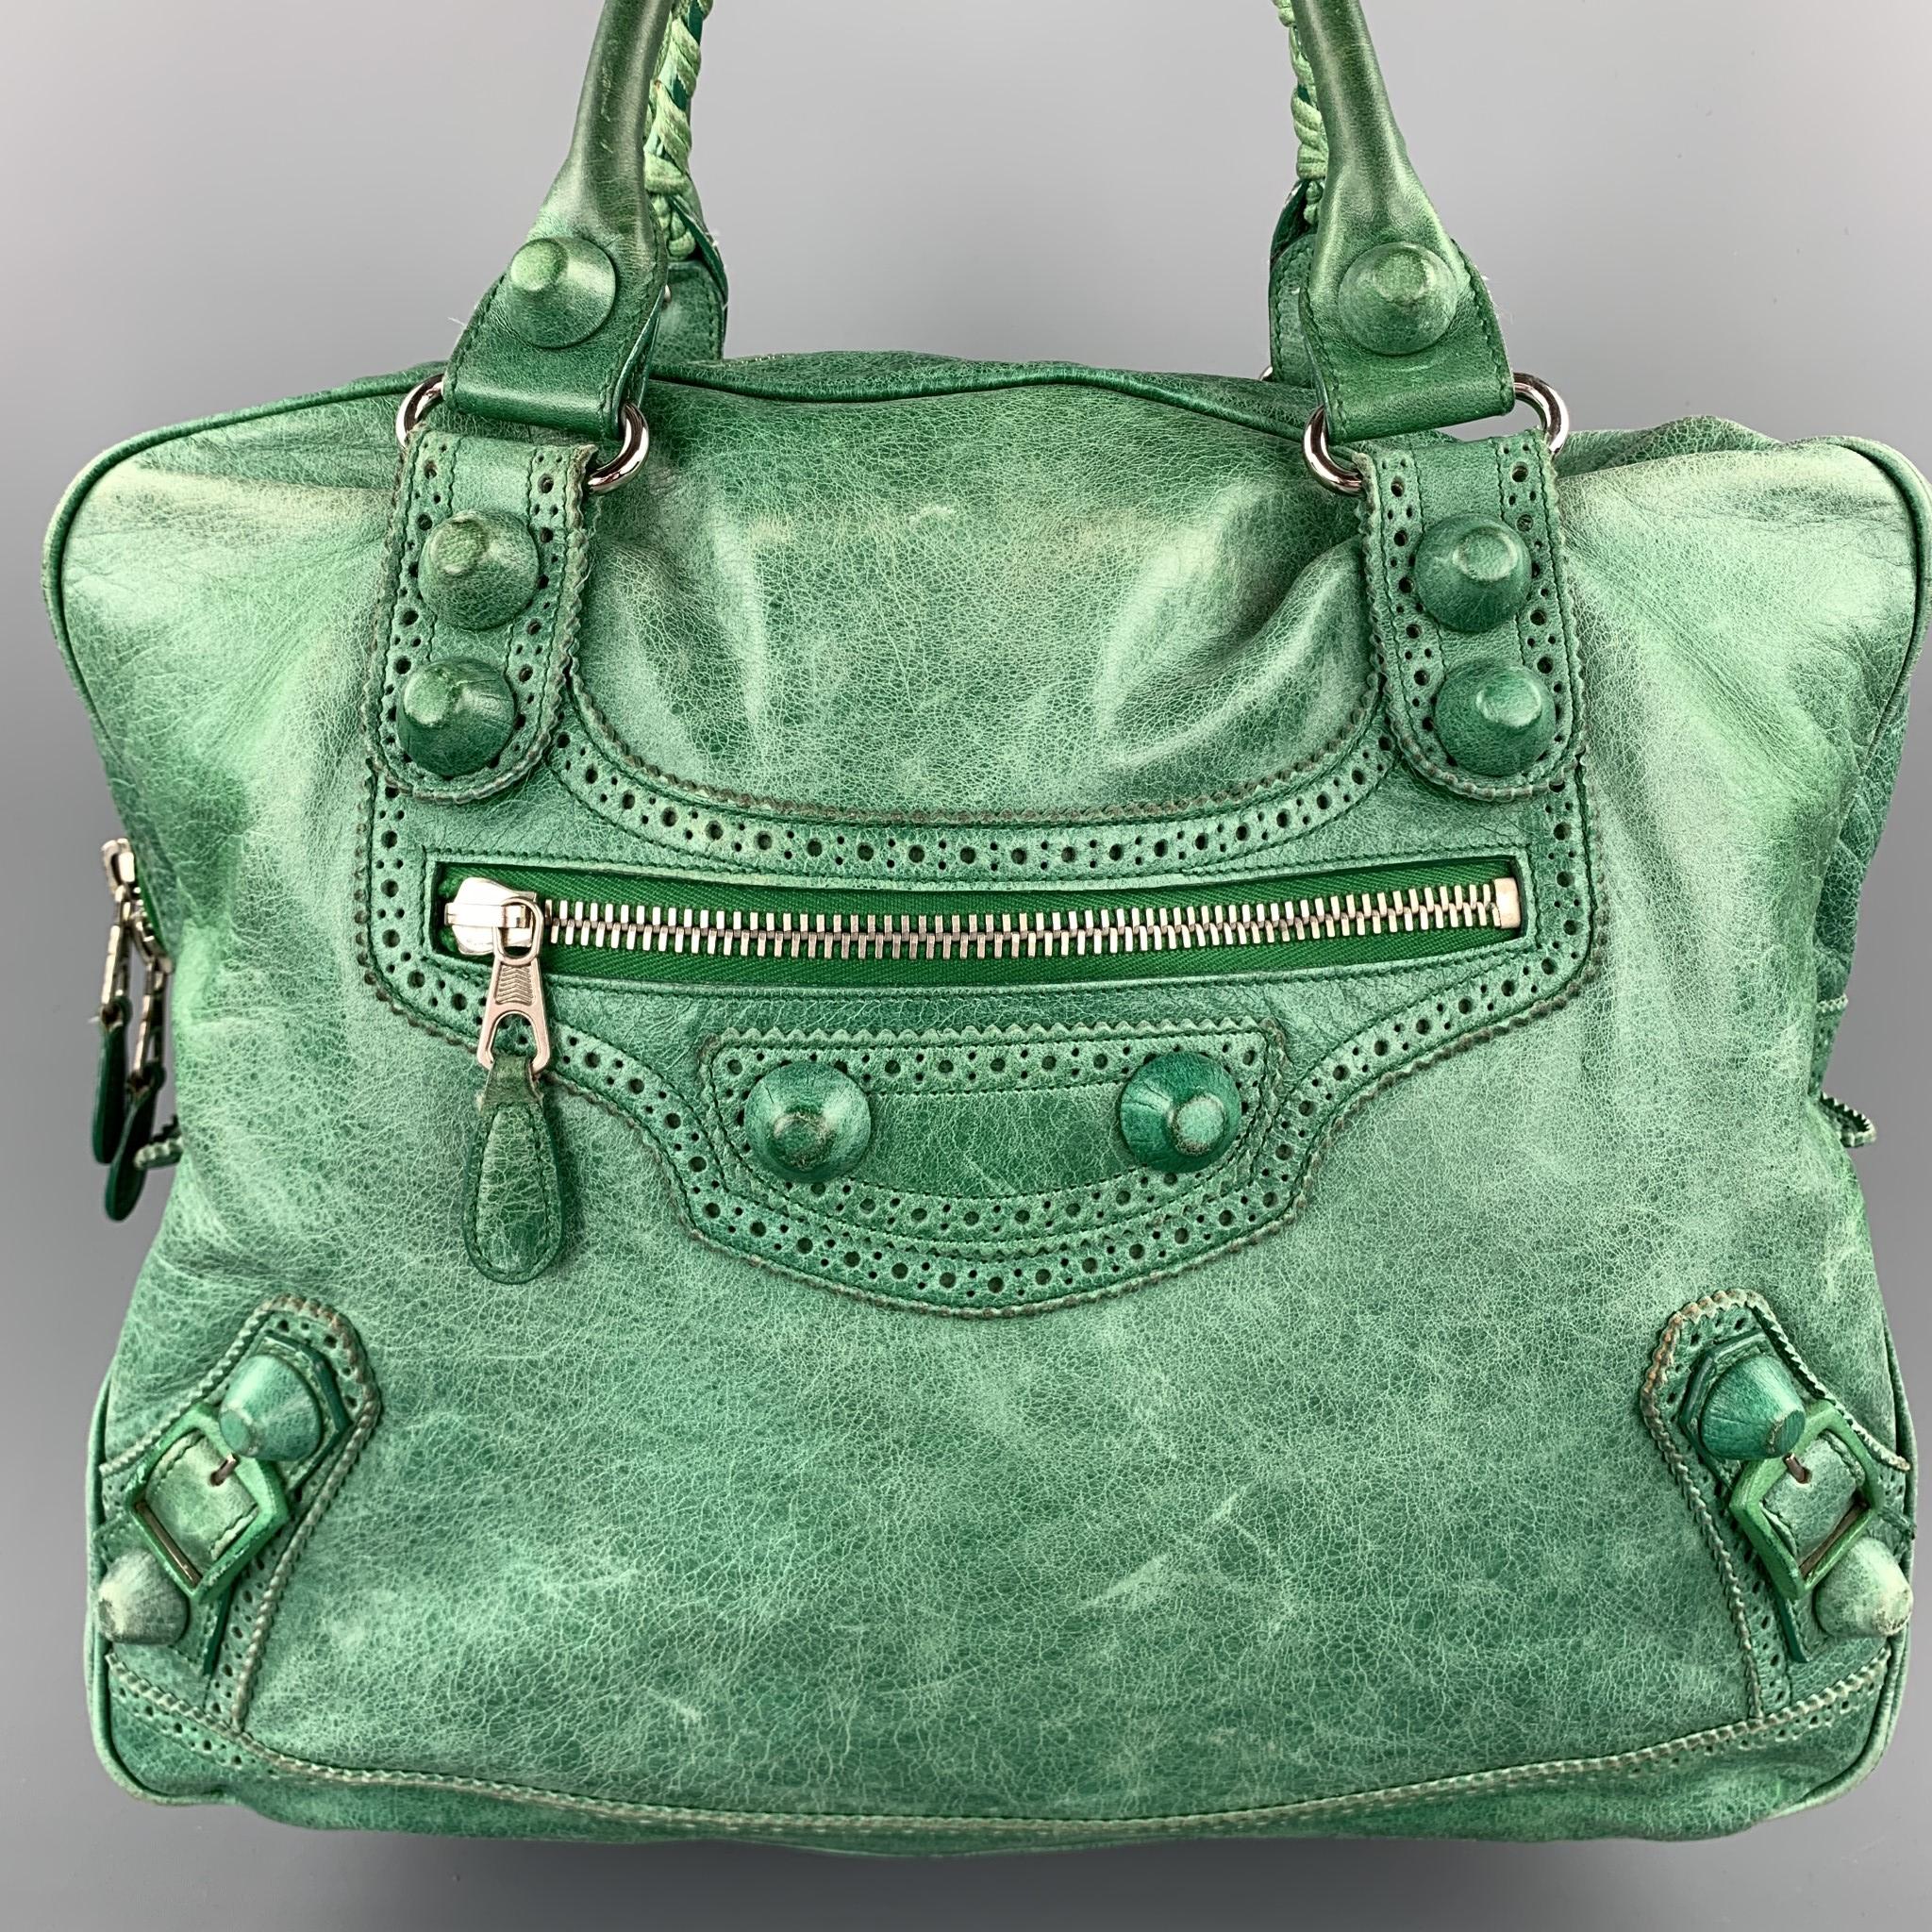 BALENCIAGA handbag comes in a green distressed leather with perforated details featuring braided top handles, large stud embellishments, silver tone hardware, inner zipper pocket, and a full zip closure. Made in Italy.

Good Pre-Owned